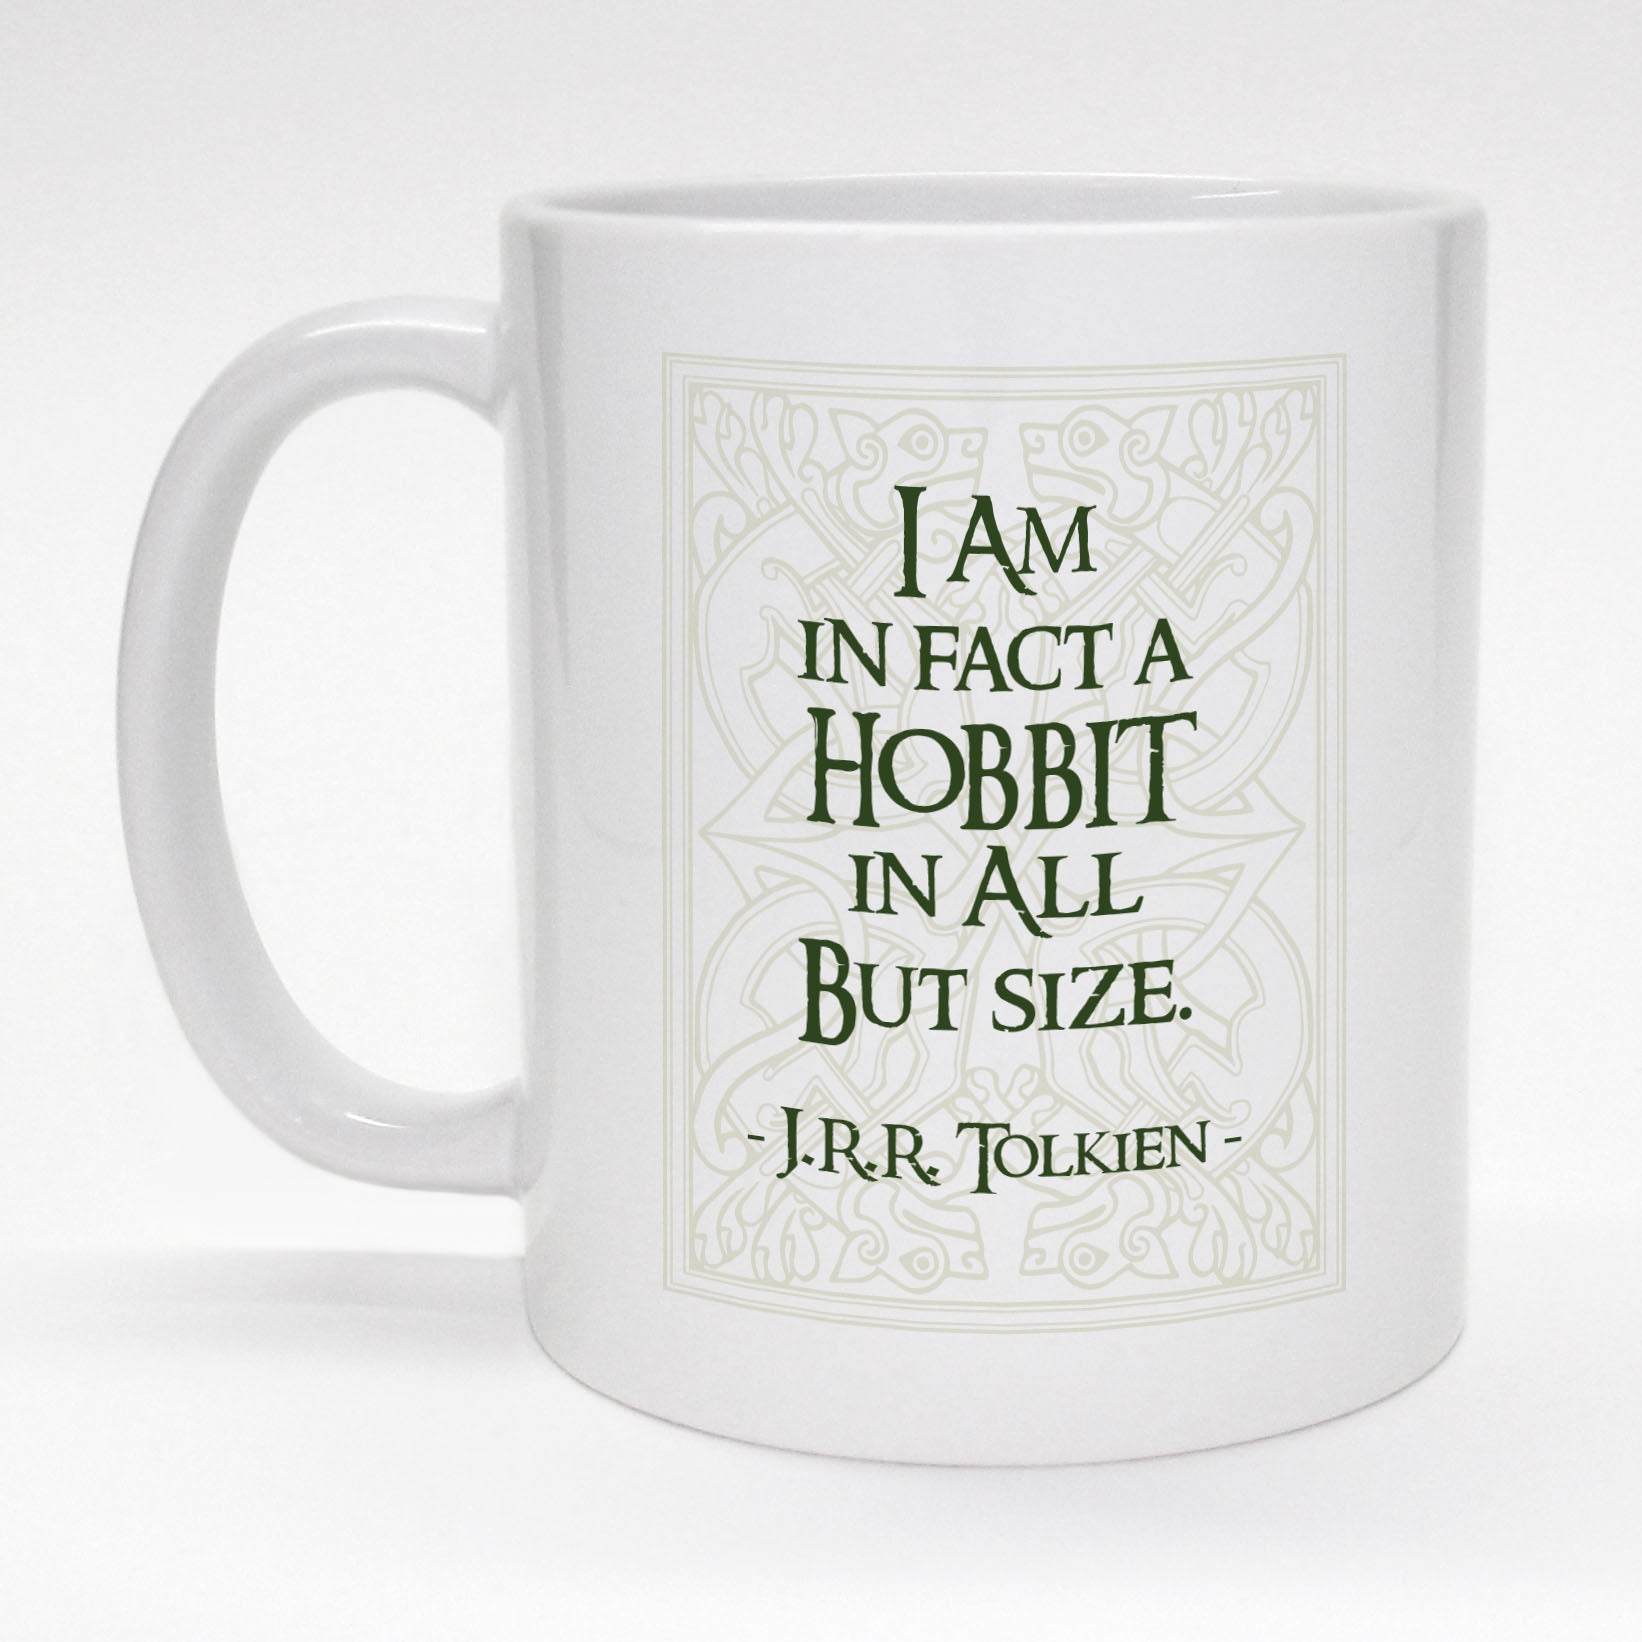 The Lord of the Rings Ceramic Mug (There Is Only One Lord of the